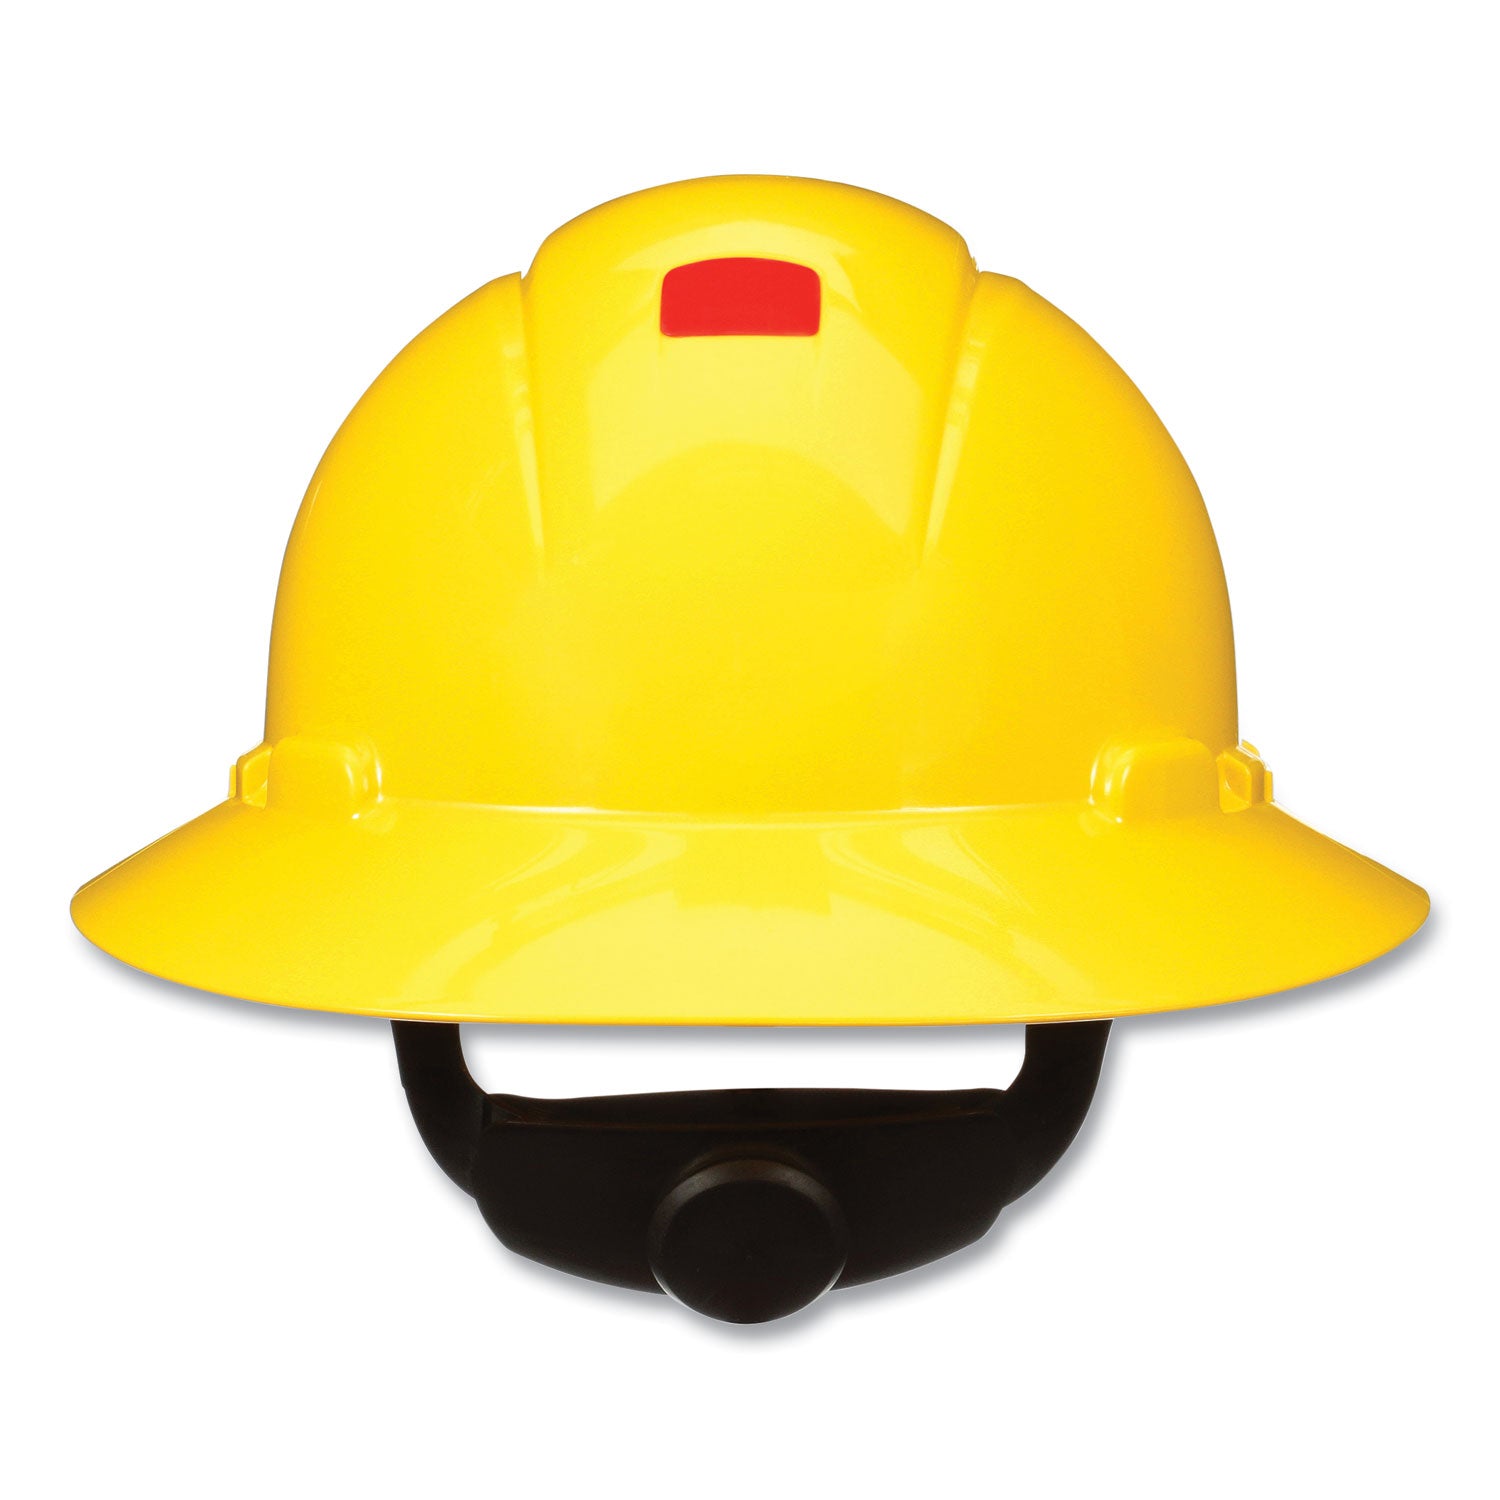 securefit-full-brim-hard-hat-with-uvicator-four-point-ratchet-suspension-yellow_mmmh802sfruv - 1